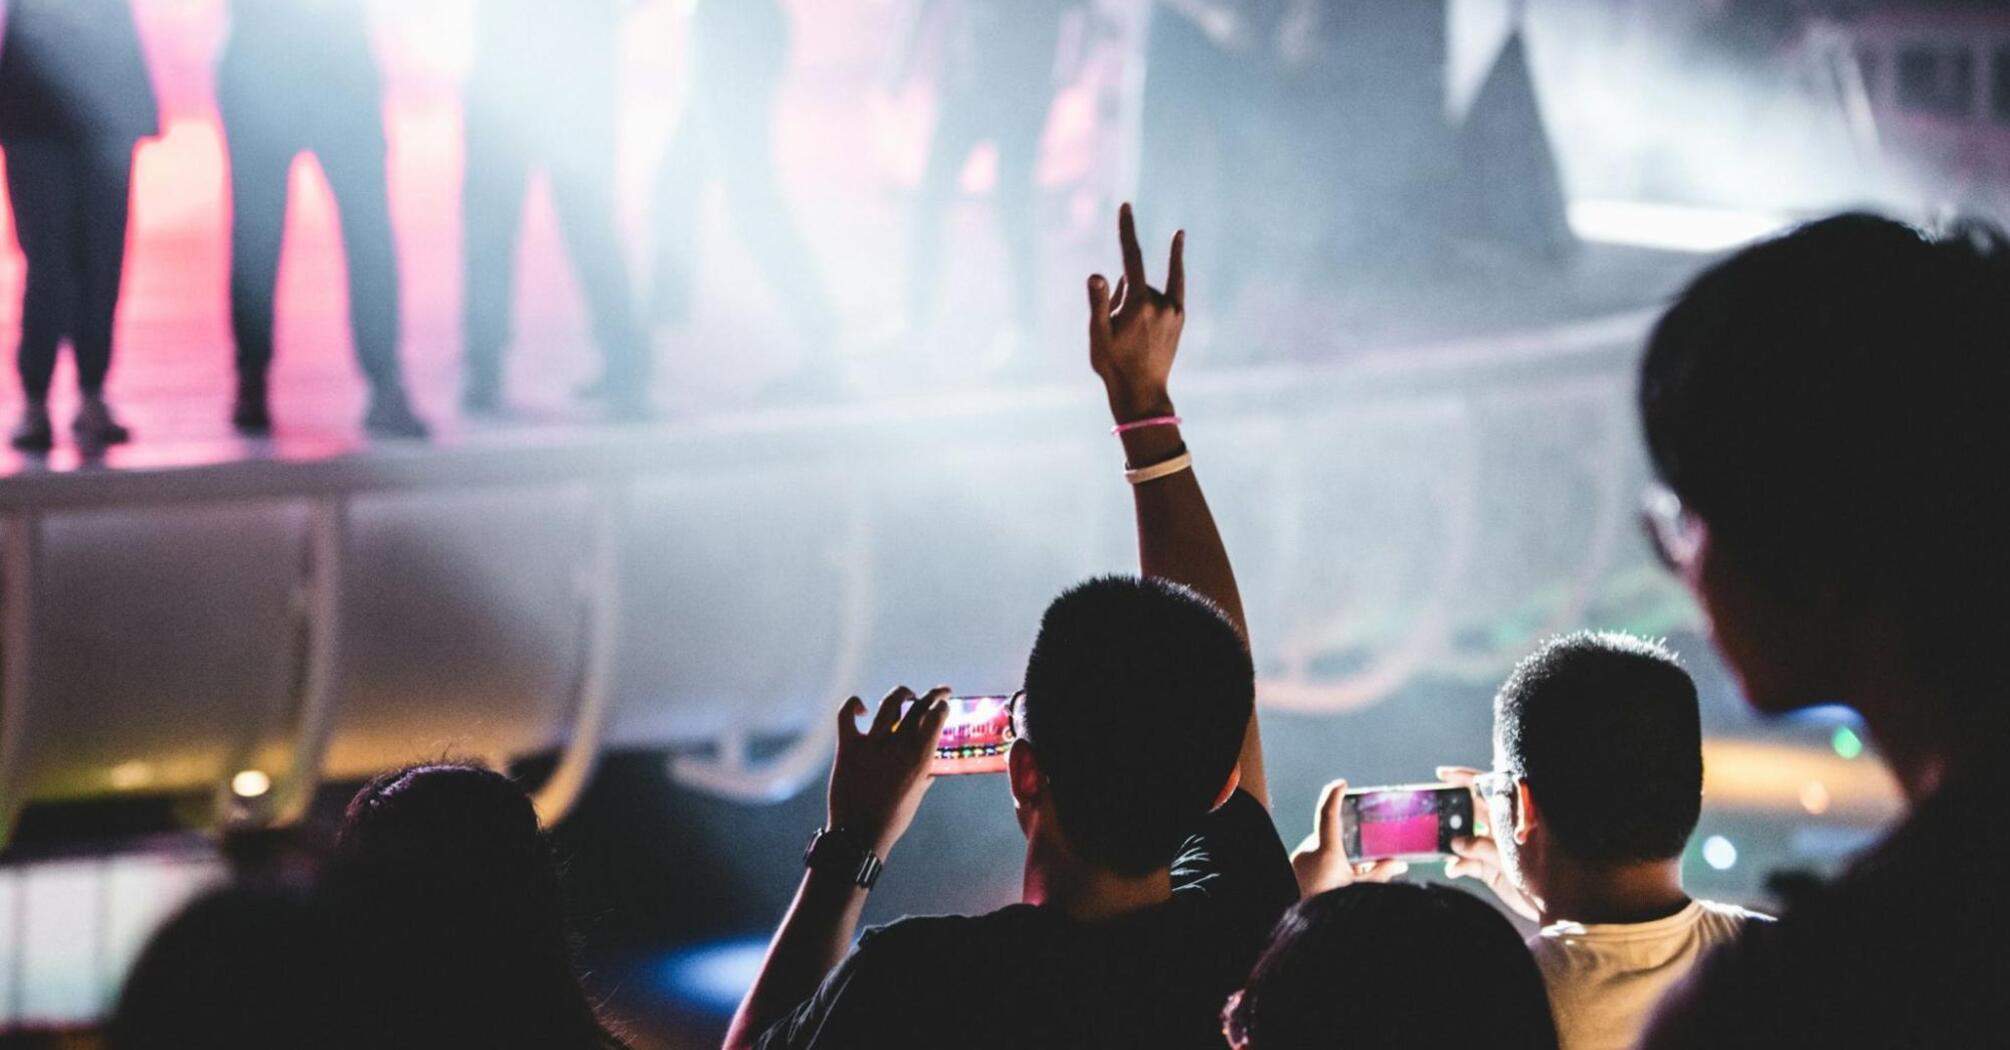 Concertgoers capturing the performance with their phones at a live music event